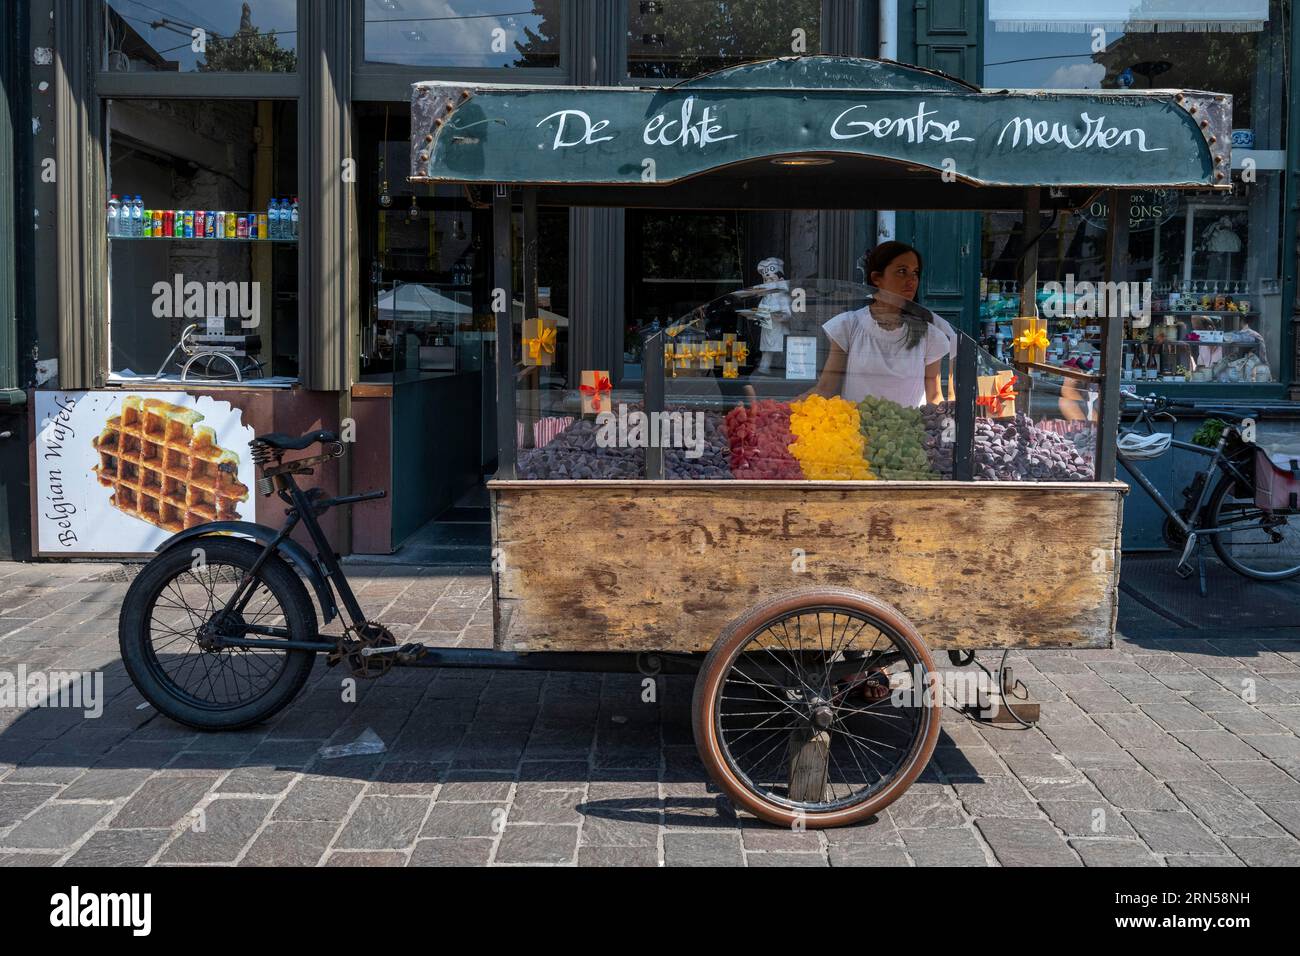 Sales stall with typical sweets, Gentse Neuzen, Ghent, Flanders, Belgium  Stock Photo - Alamy